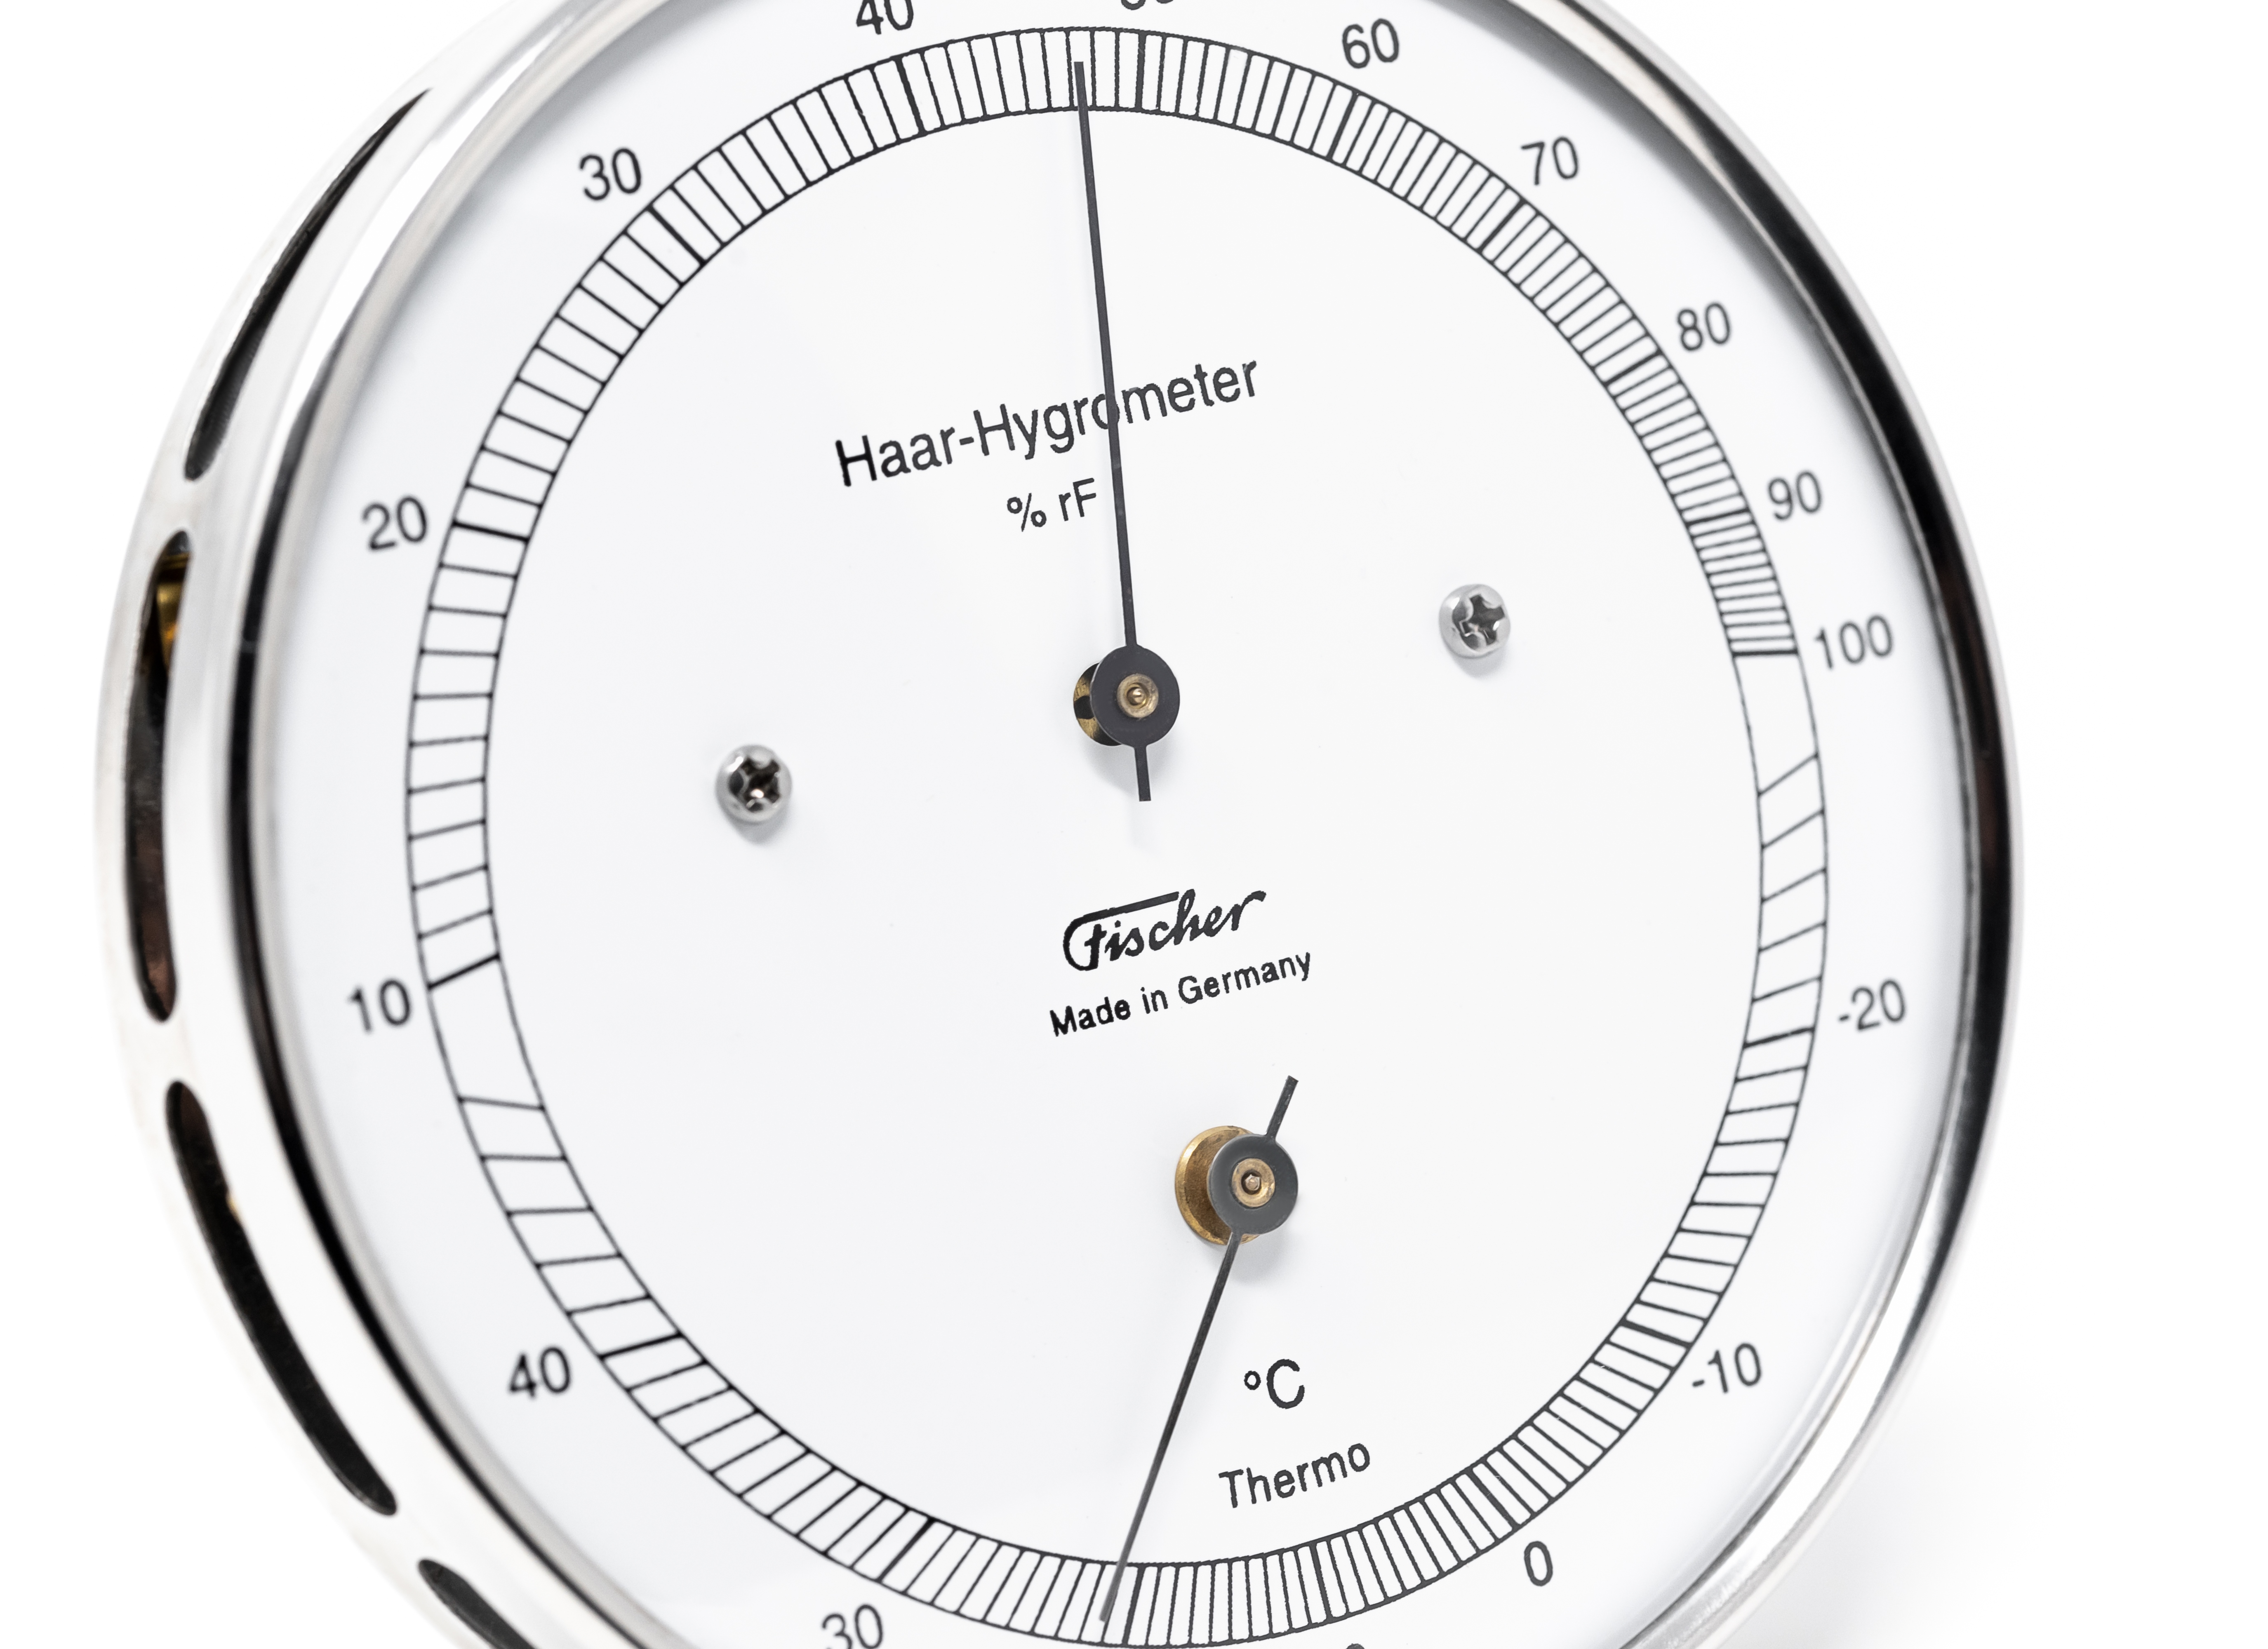 Haar-Hygrometer mit Thermometer Made in Germany 